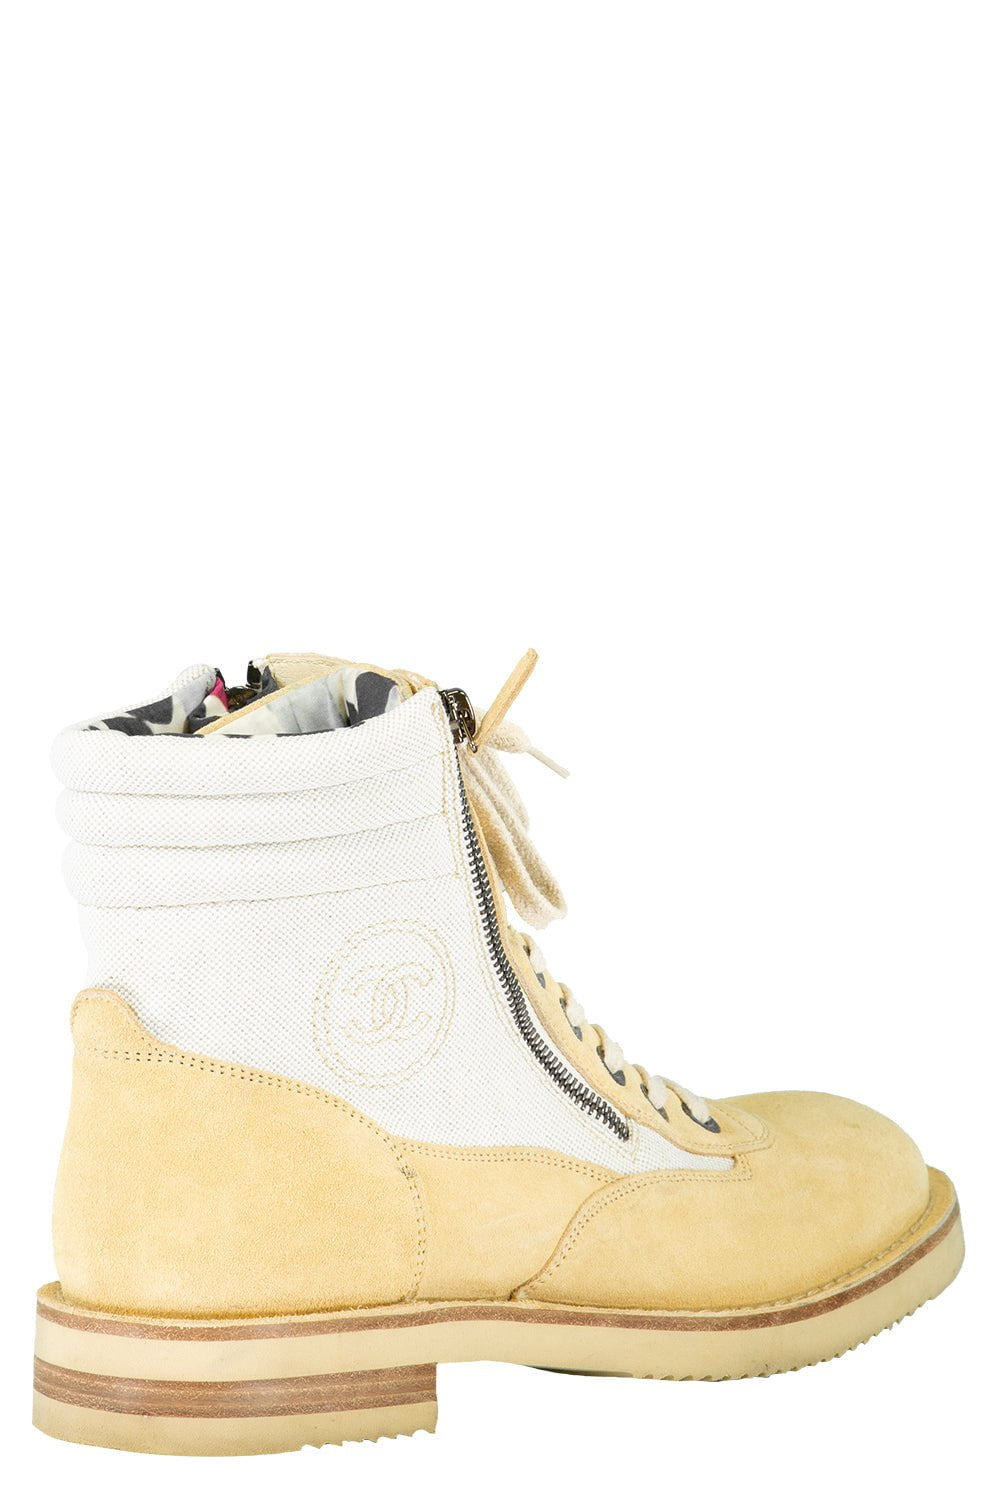 CHANEL-Suede Ankle Combat Boots-TAN